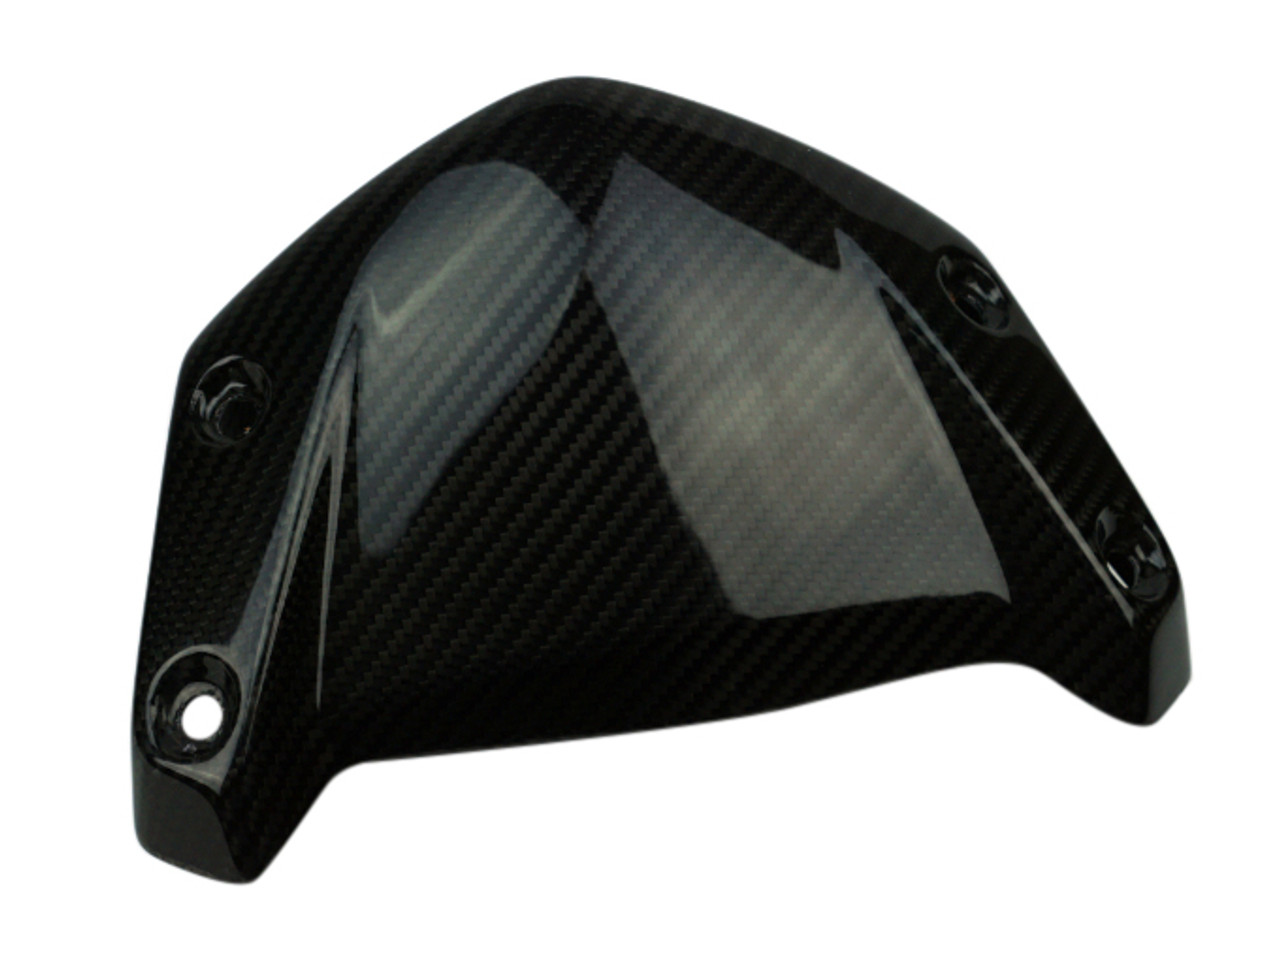 Windscreen in Glossy Twill Weave Carbon Fiber for BMW R1200R 2015+